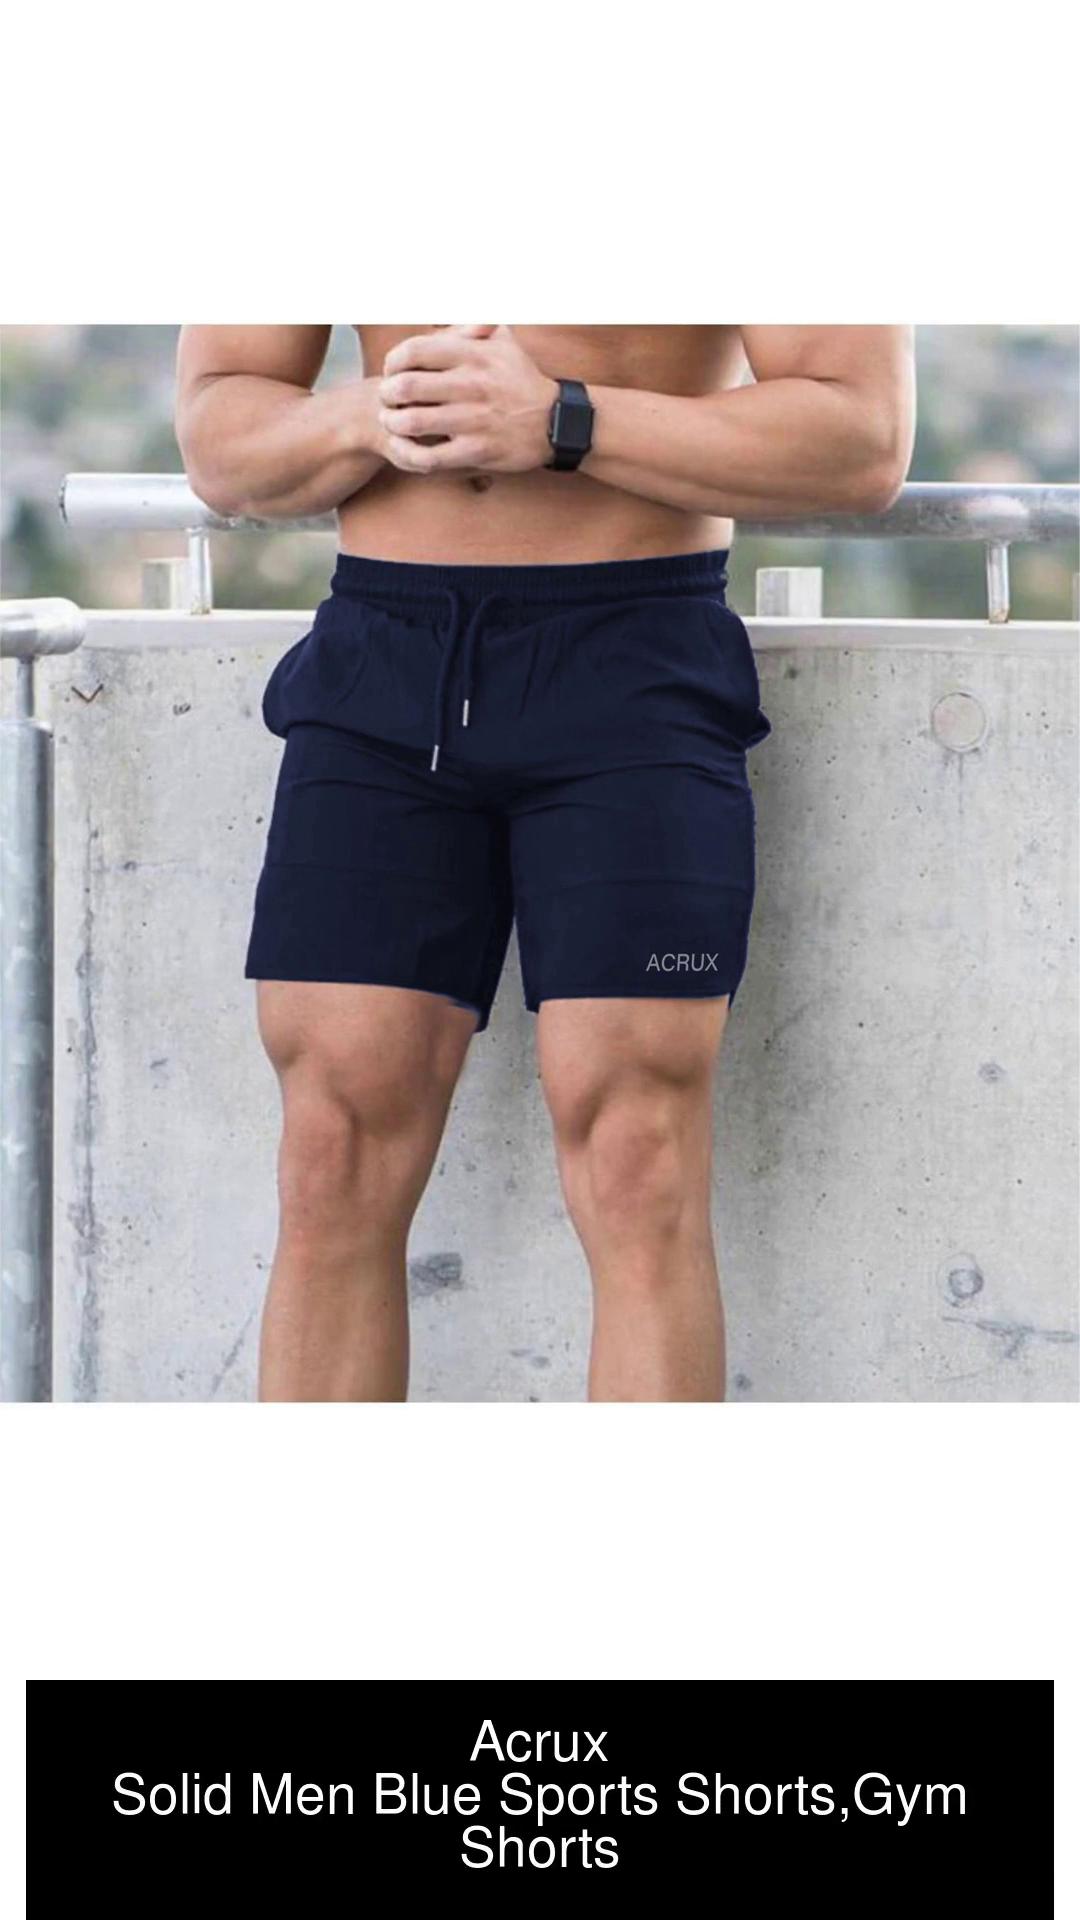 Acrux Solid Men Blue Sports Shorts, Gym Shorts - Buy Acrux Solid Men Blue  Sports Shorts, Gym Shorts Online at Best Prices in India